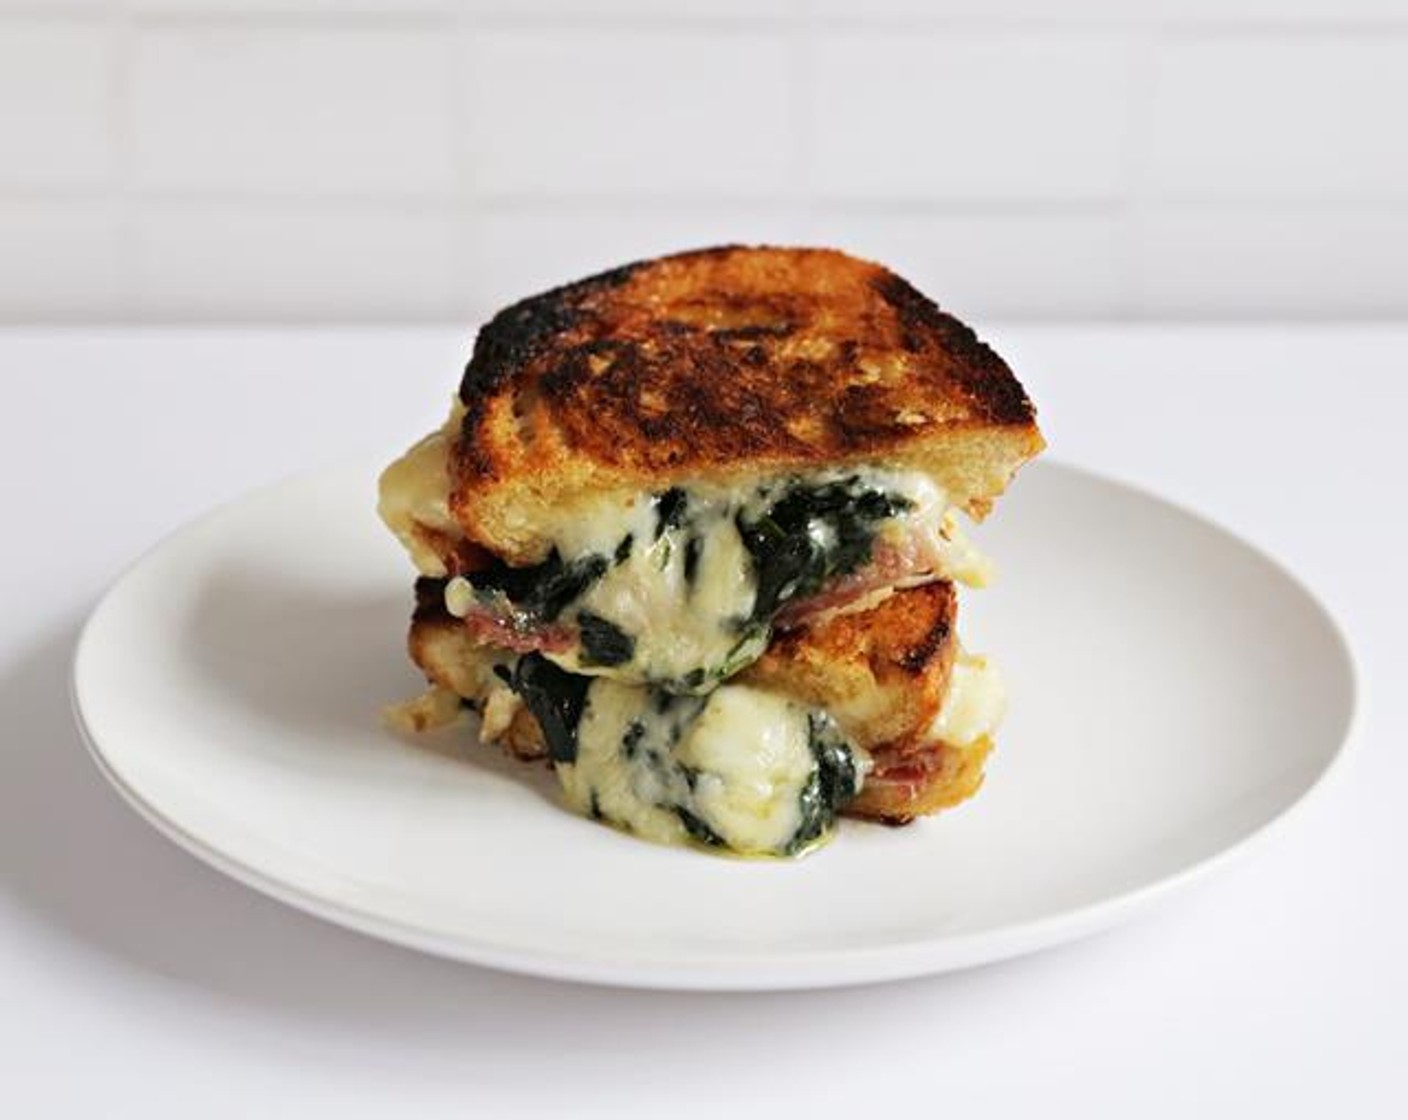 Jenny’s Spinach & Pancetta Grilled Cheese